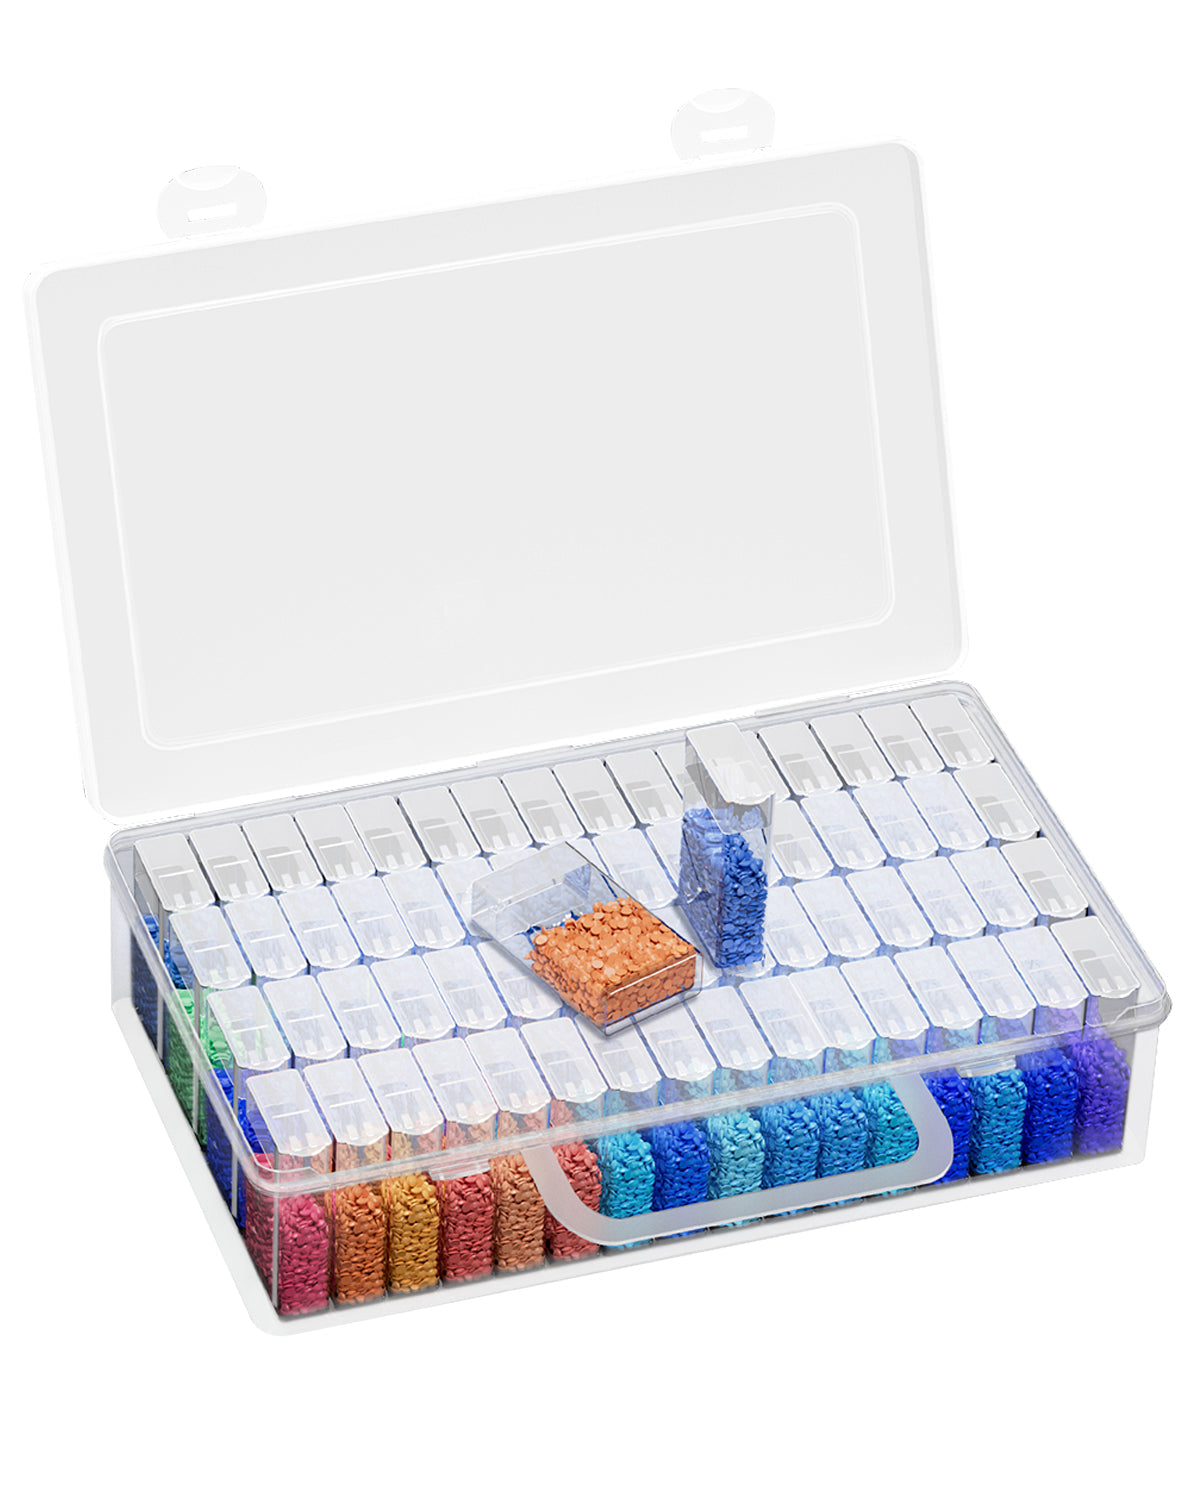 Best Value-64 Grids Diamond Painting Storage Containers